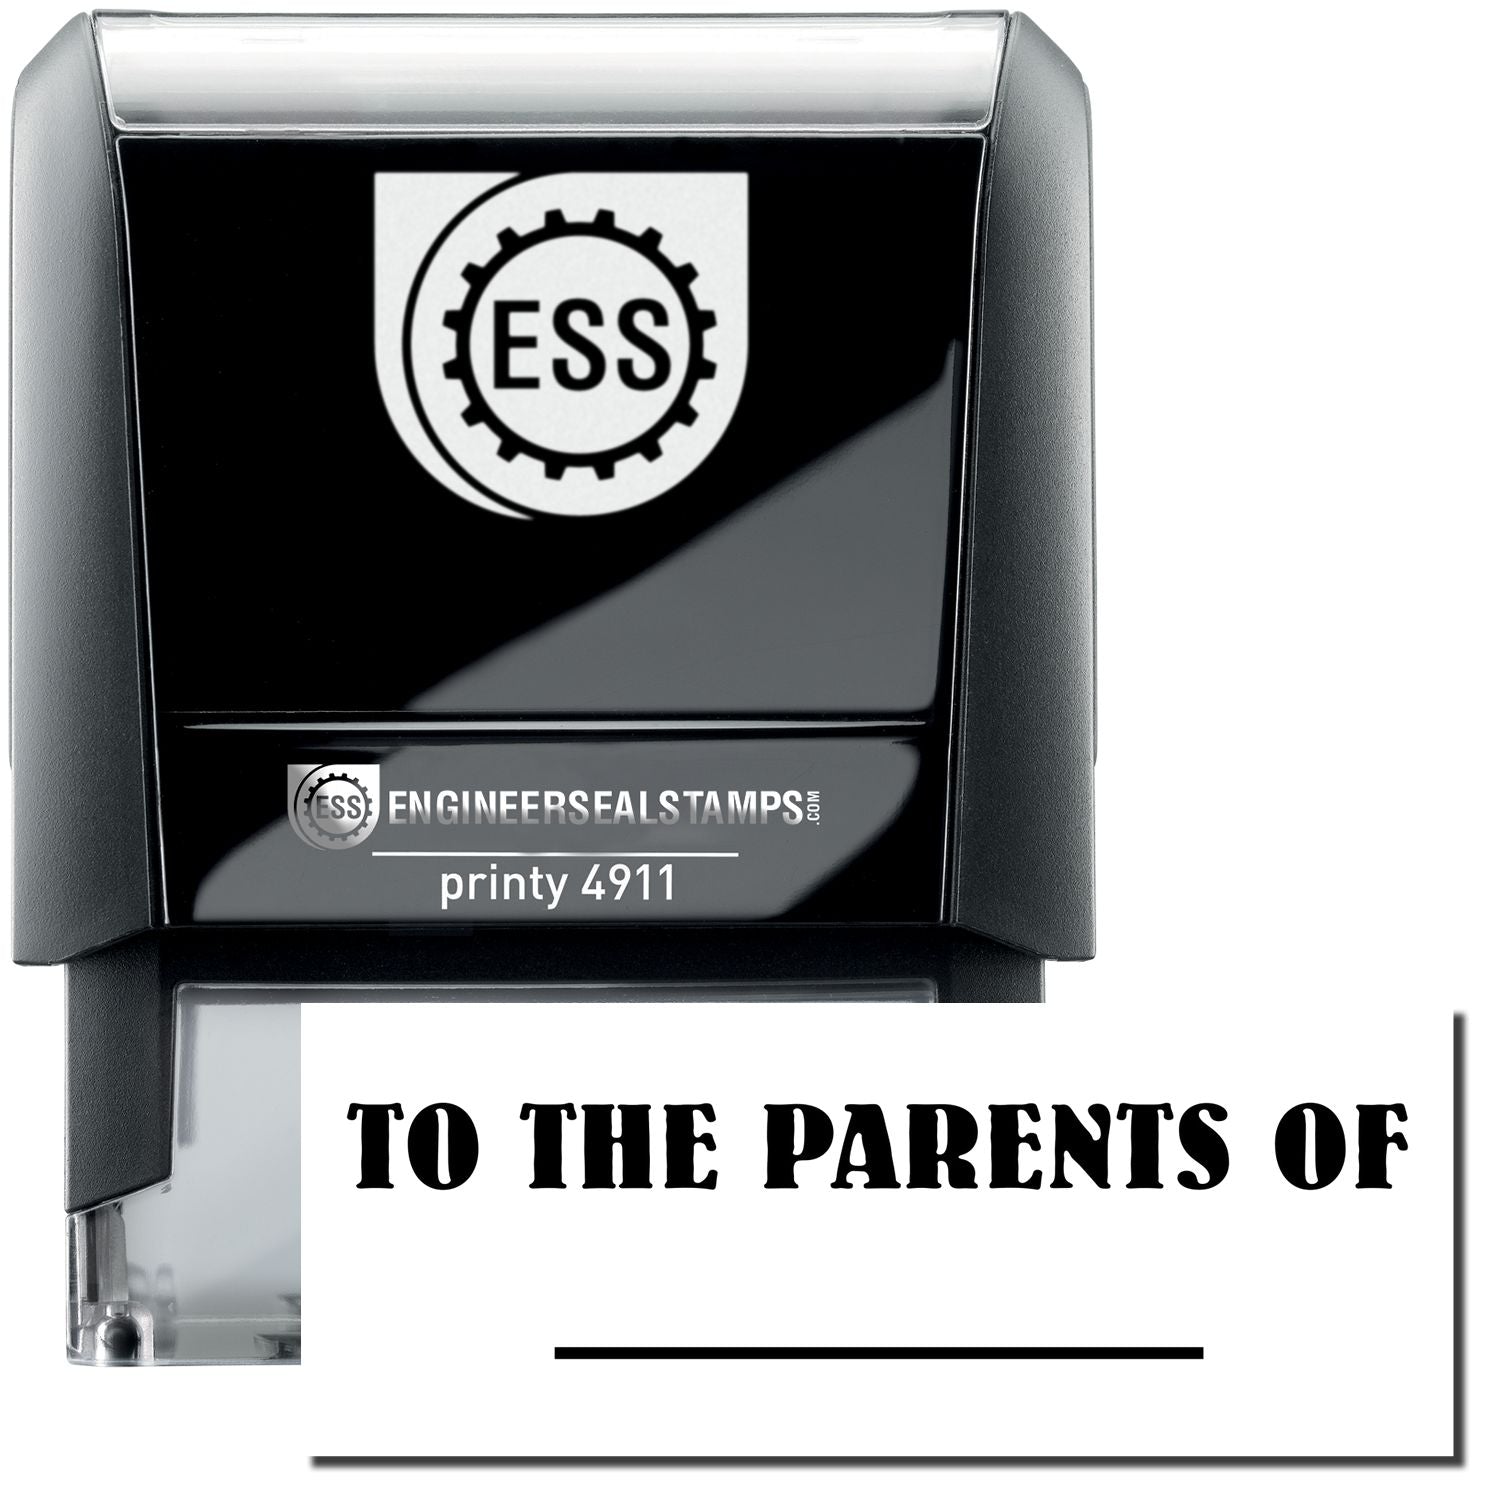 A self-inking stamp with a stamped image showing how the text "TO THE PARENTS OF" with a line under it is displayed after stamping.